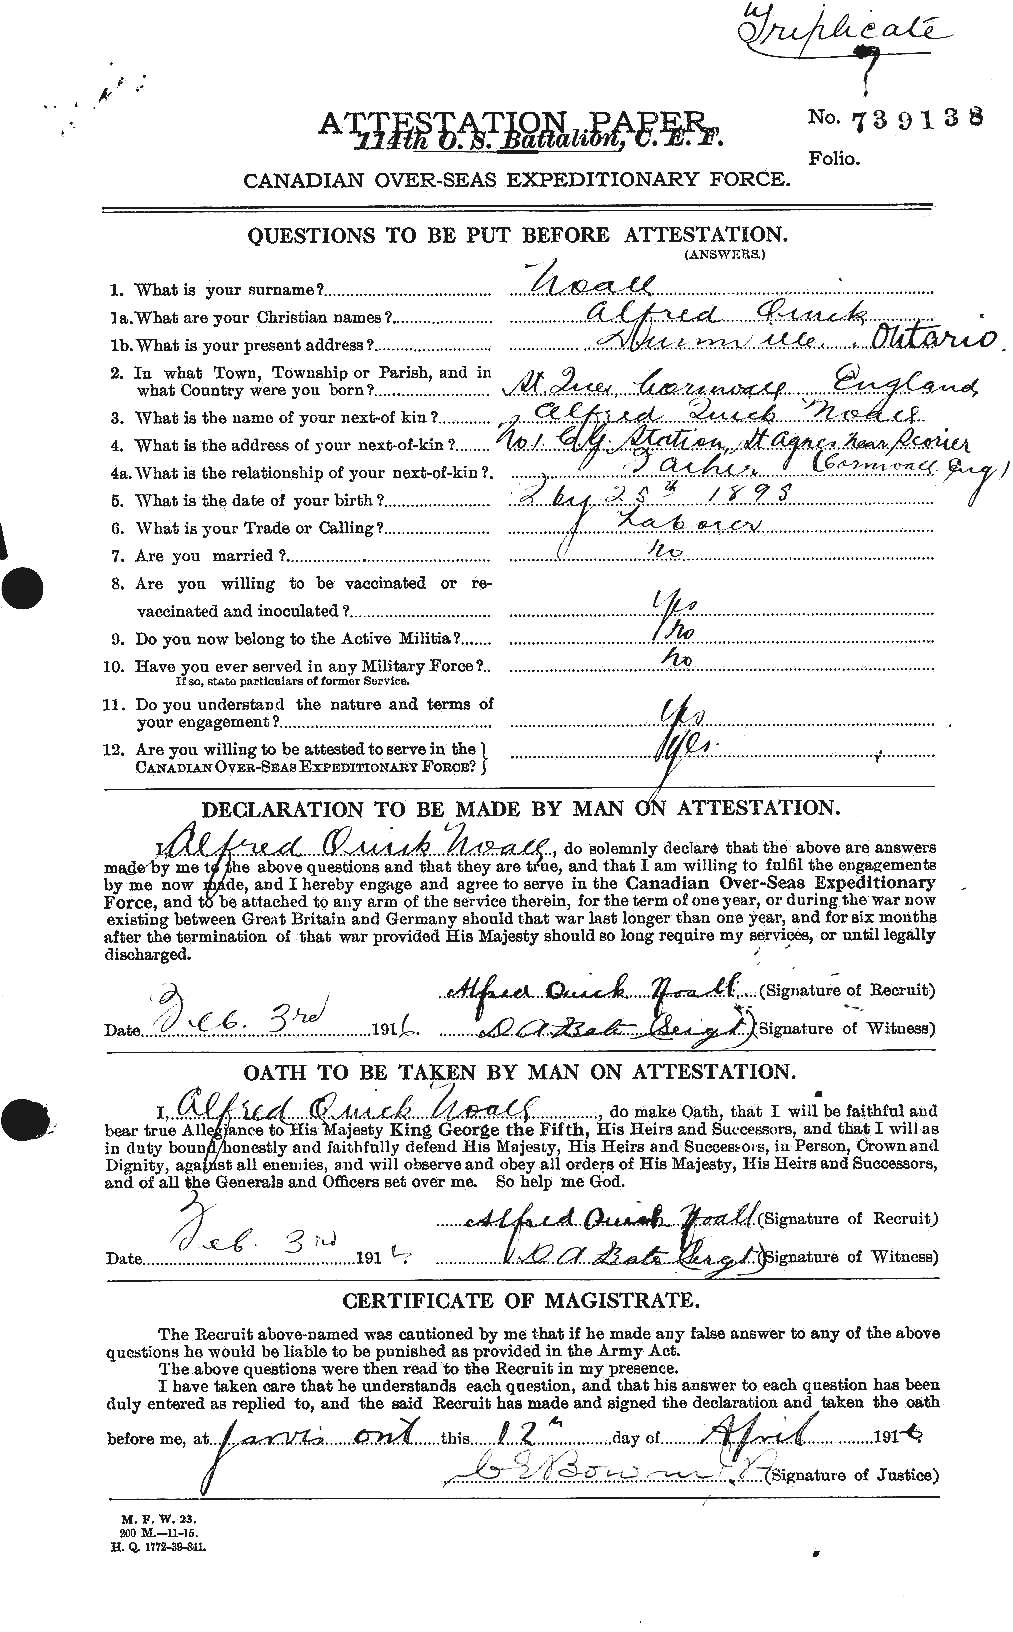 Personnel Records of the First World War - CEF 549314a